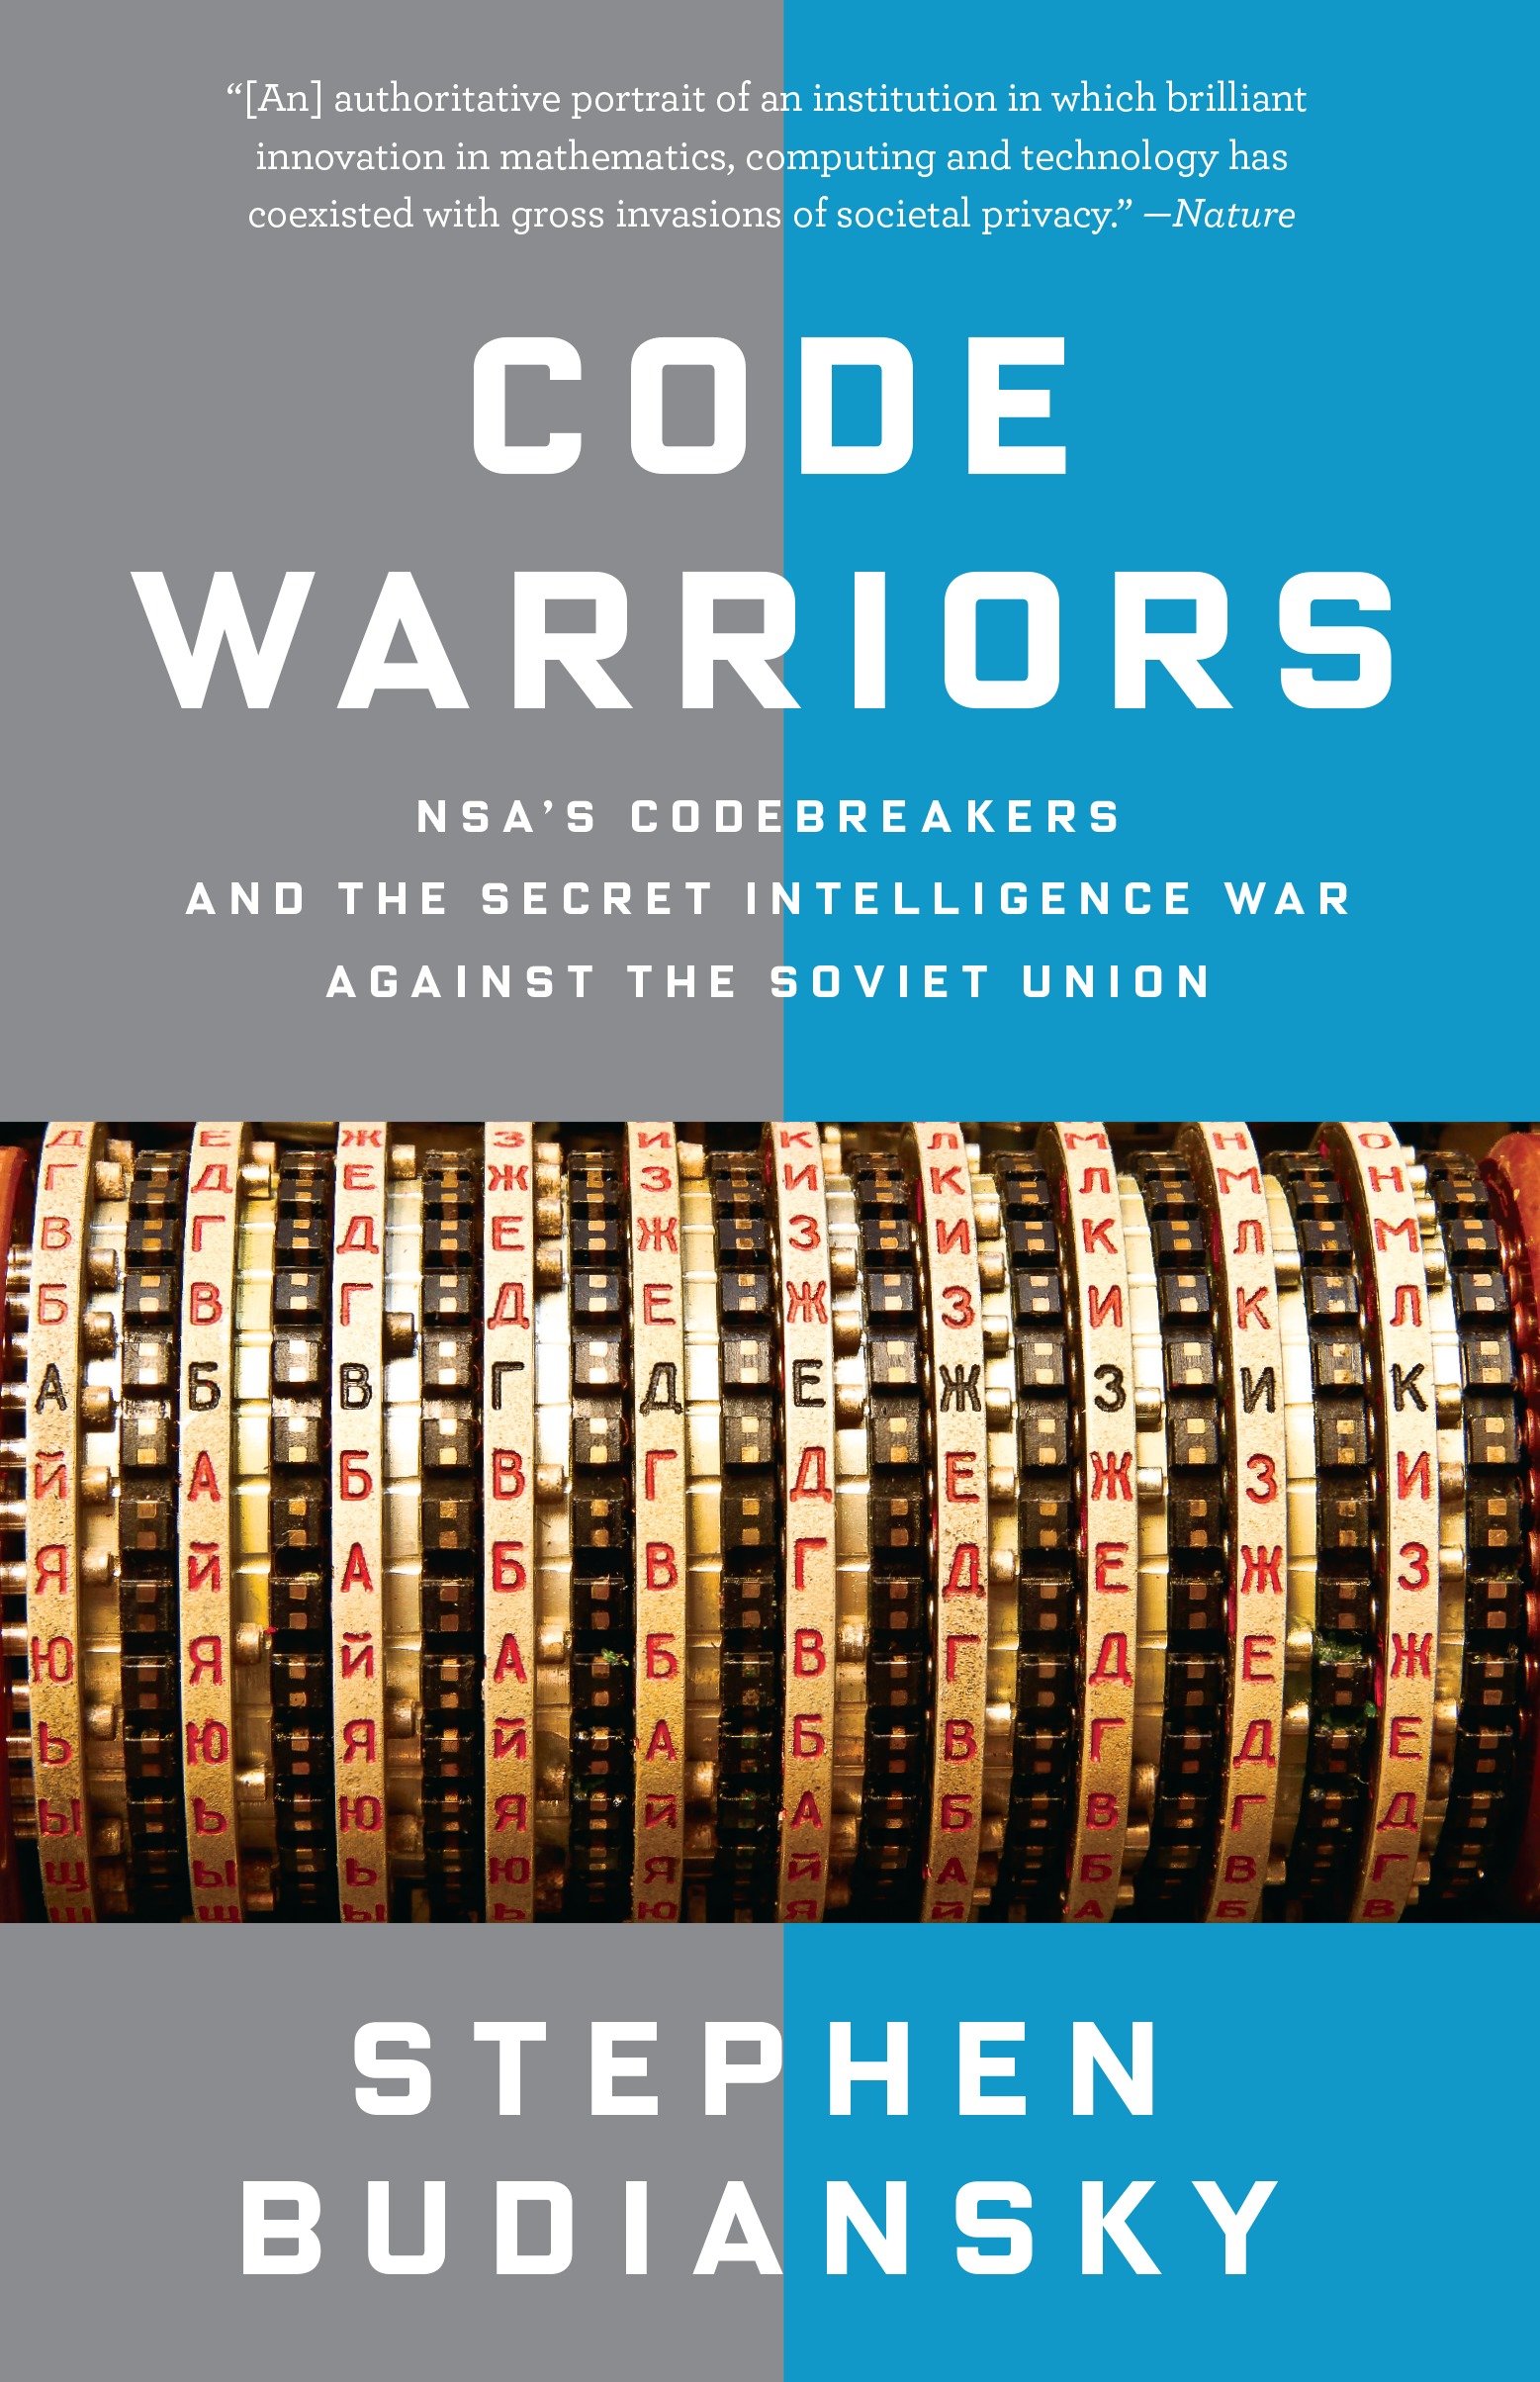 Image de couverture de Code Warriors [electronic resource] : NSA's Codebreakers and the Secret Intelligence War Against the Soviet Union